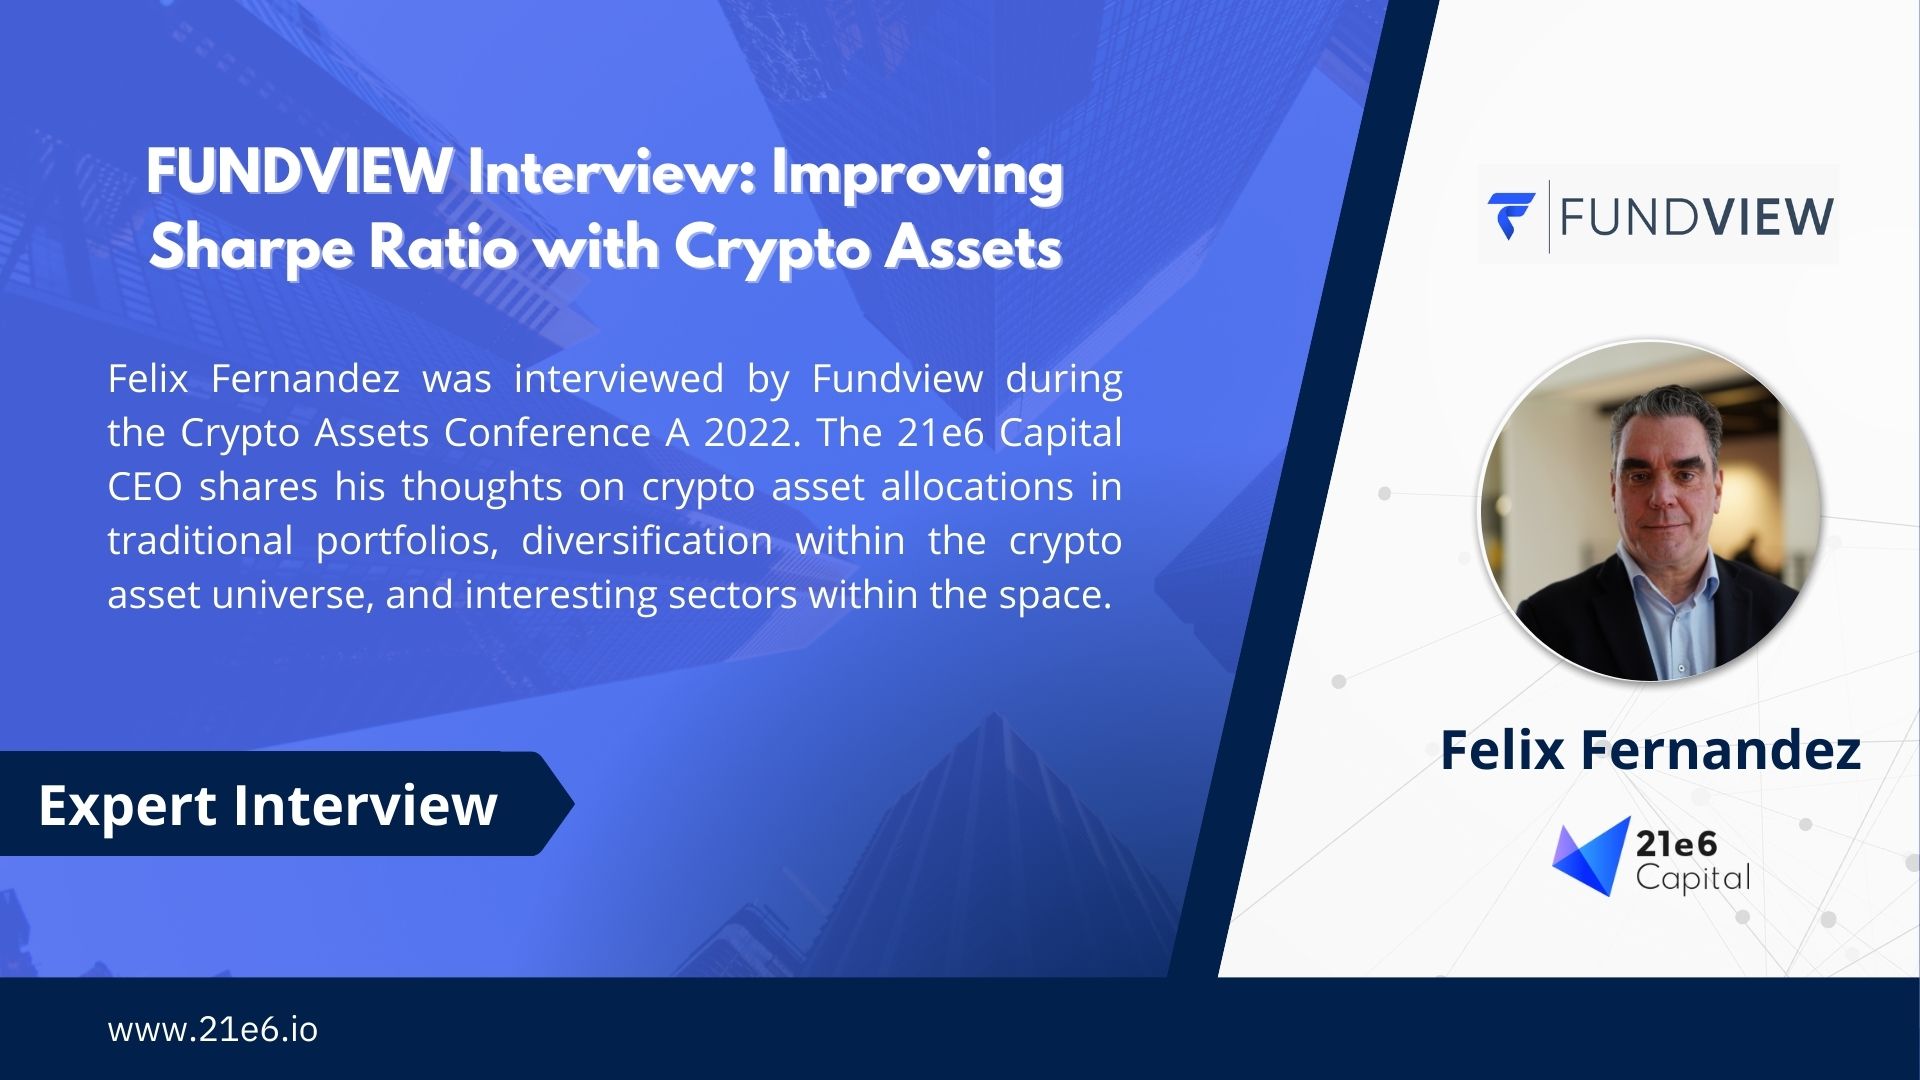 Thumbnail: Fundview Interview